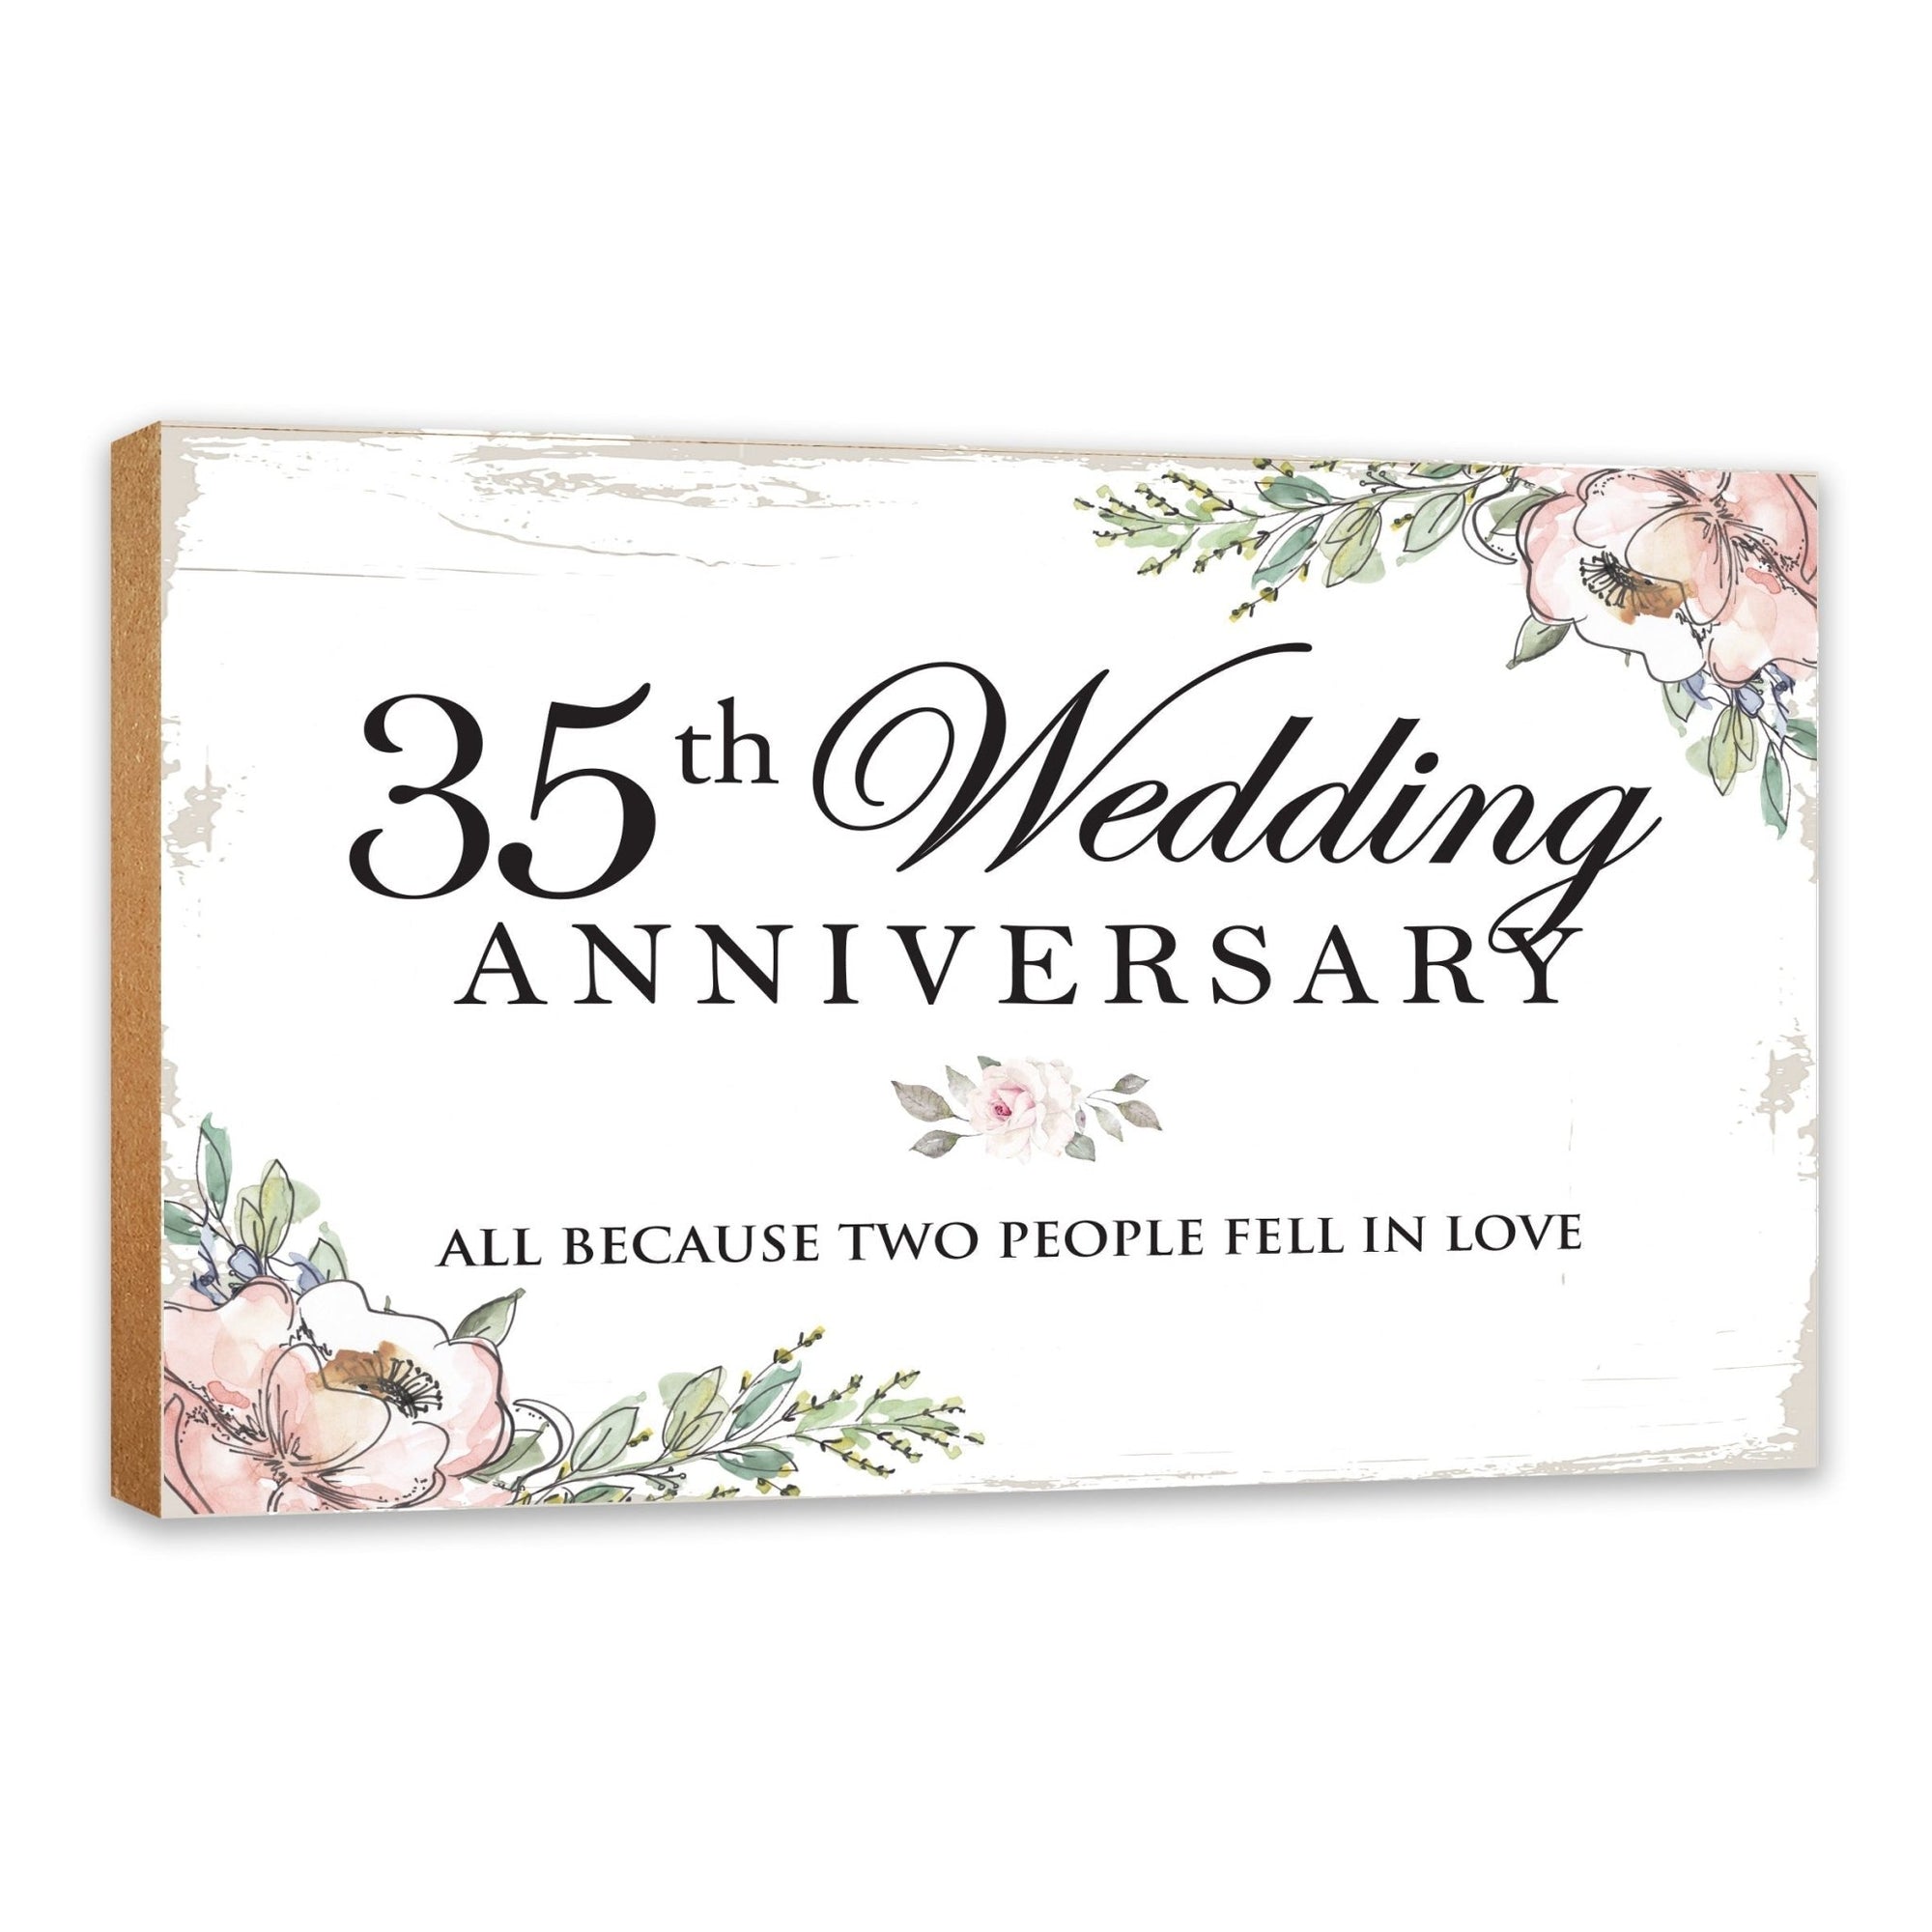 35th Wedding Anniversary Unique Shelf Decor and Tabletop Signs Gift for Couples - Fell in Love - LifeSong Milestones